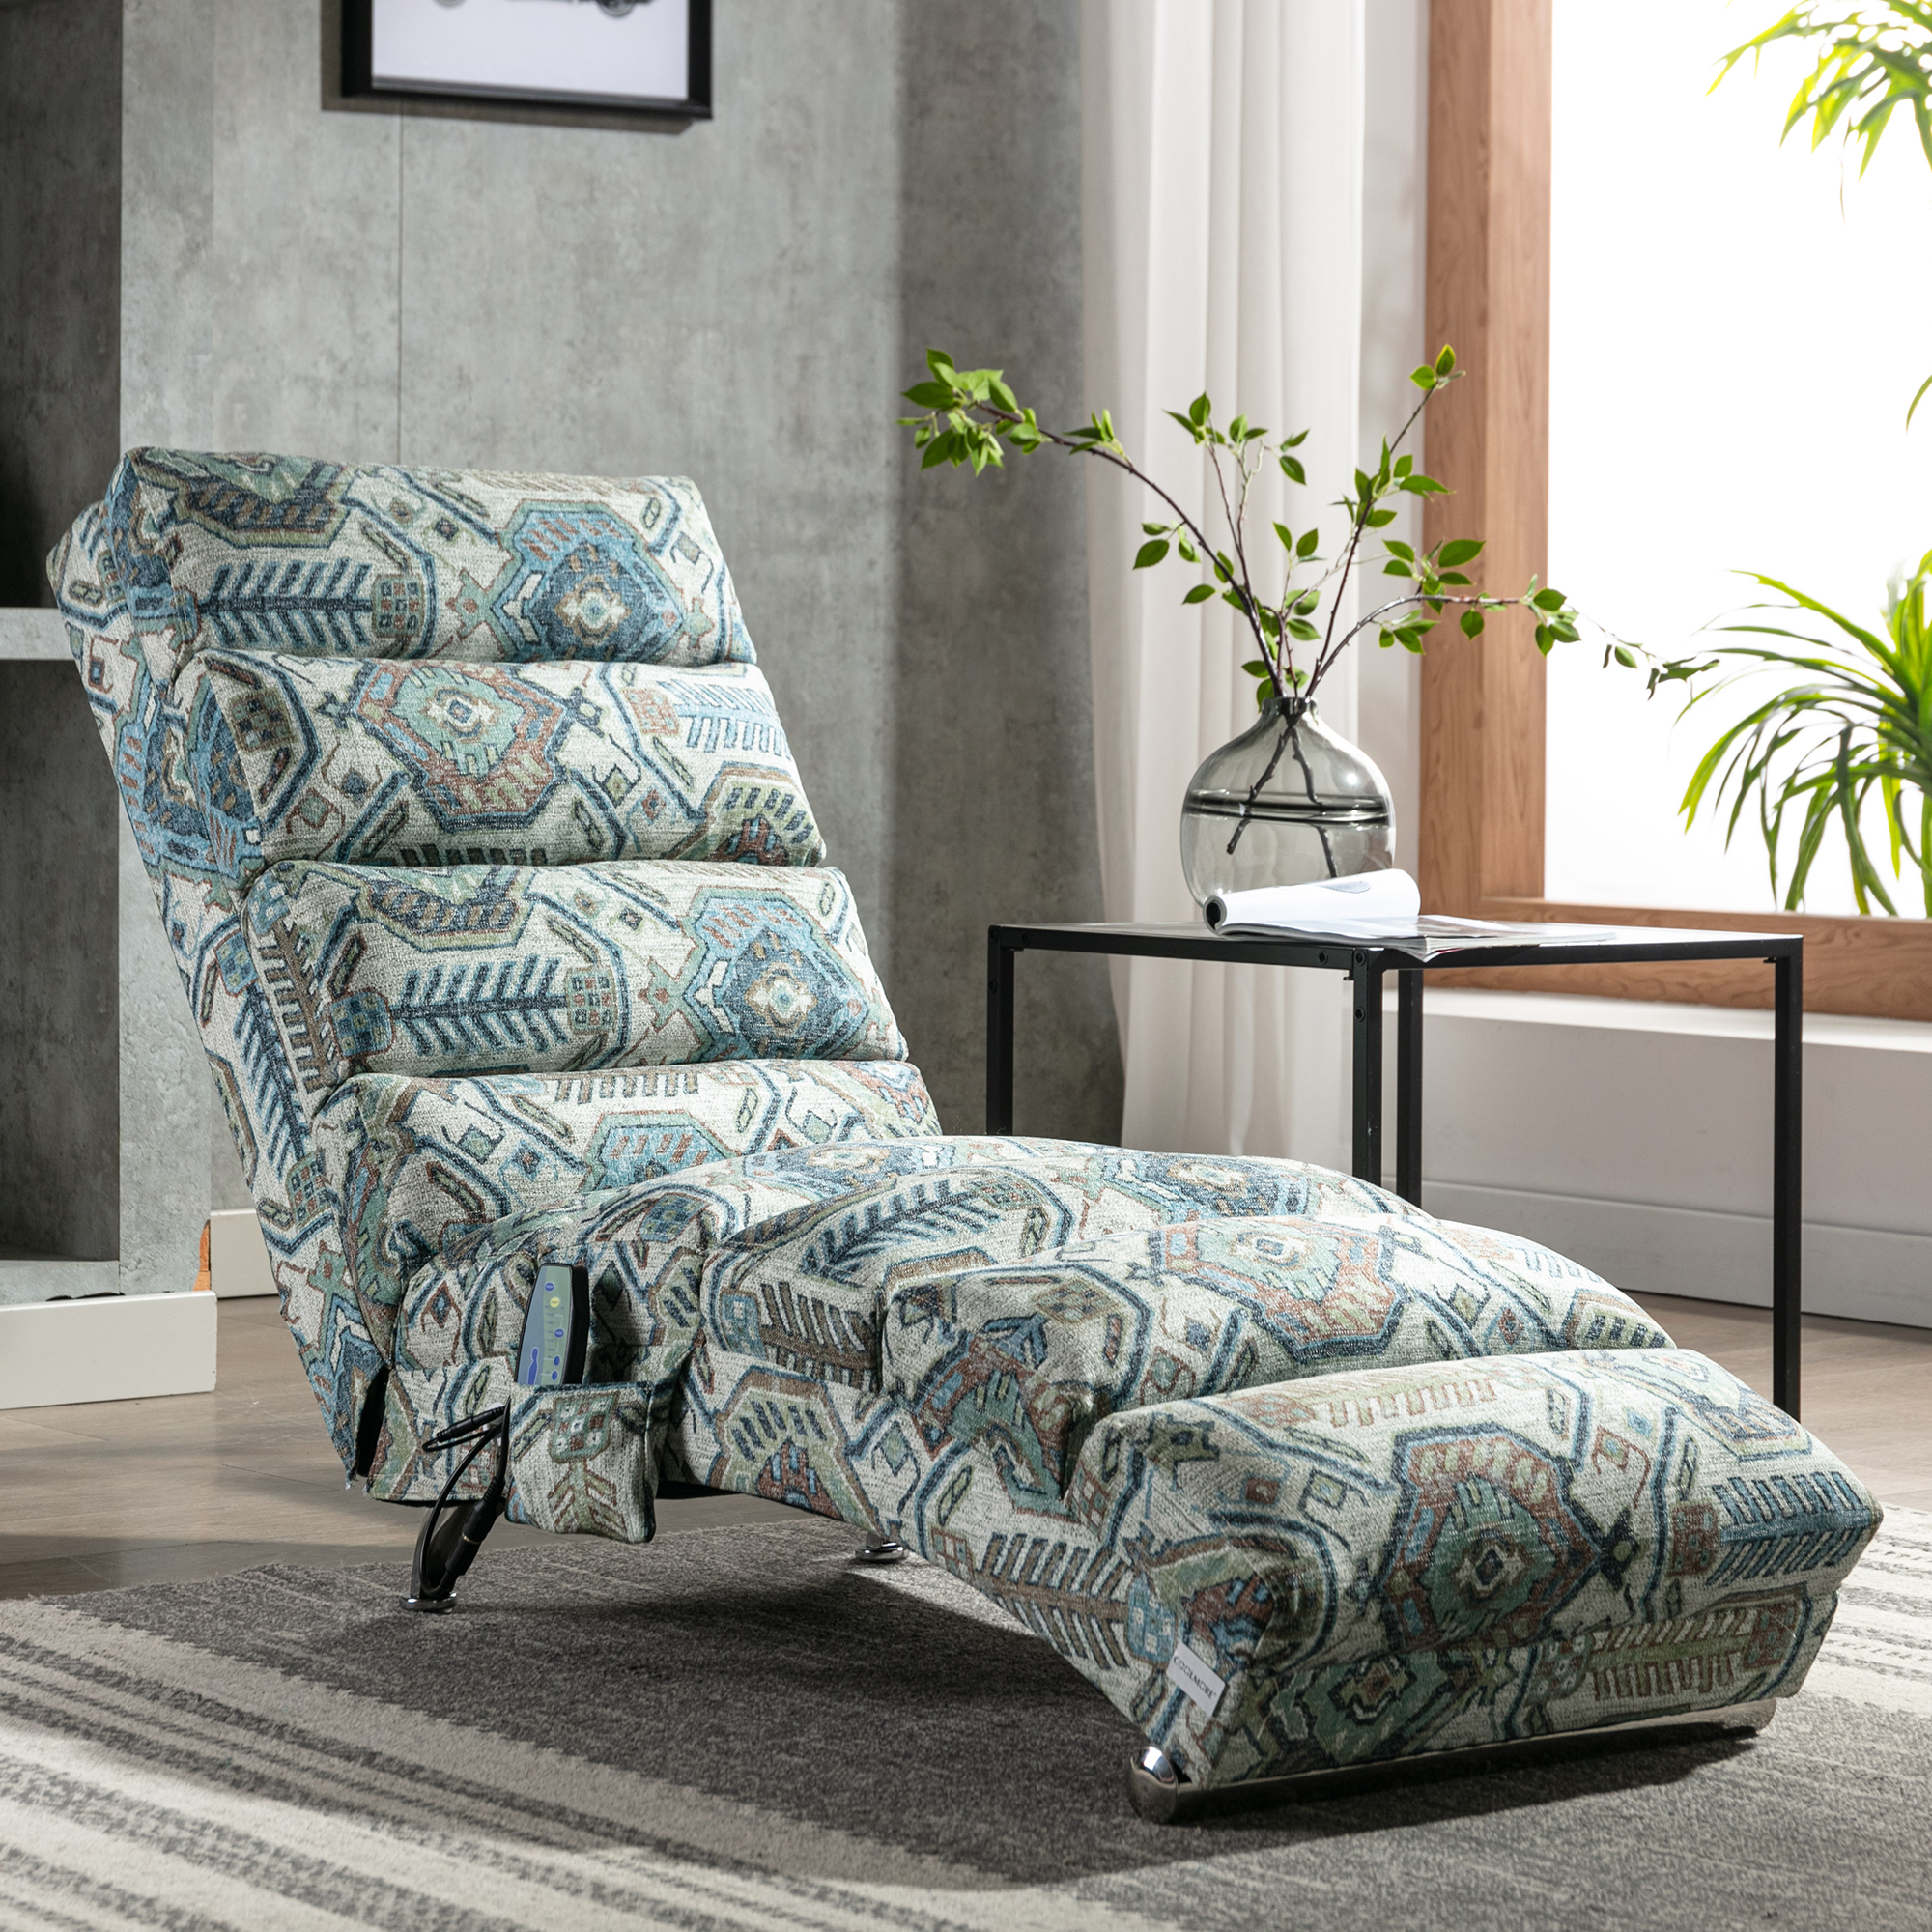 paproos Rug Flower Indoor Chaise Lounge with Massage, Modern Ergonomic Electric Massage Floor Lounger with Remote Control&Side Pocket, Upholstered Recliner Sleeper Chair for Living Room Bedroom Office - image 2 of 13